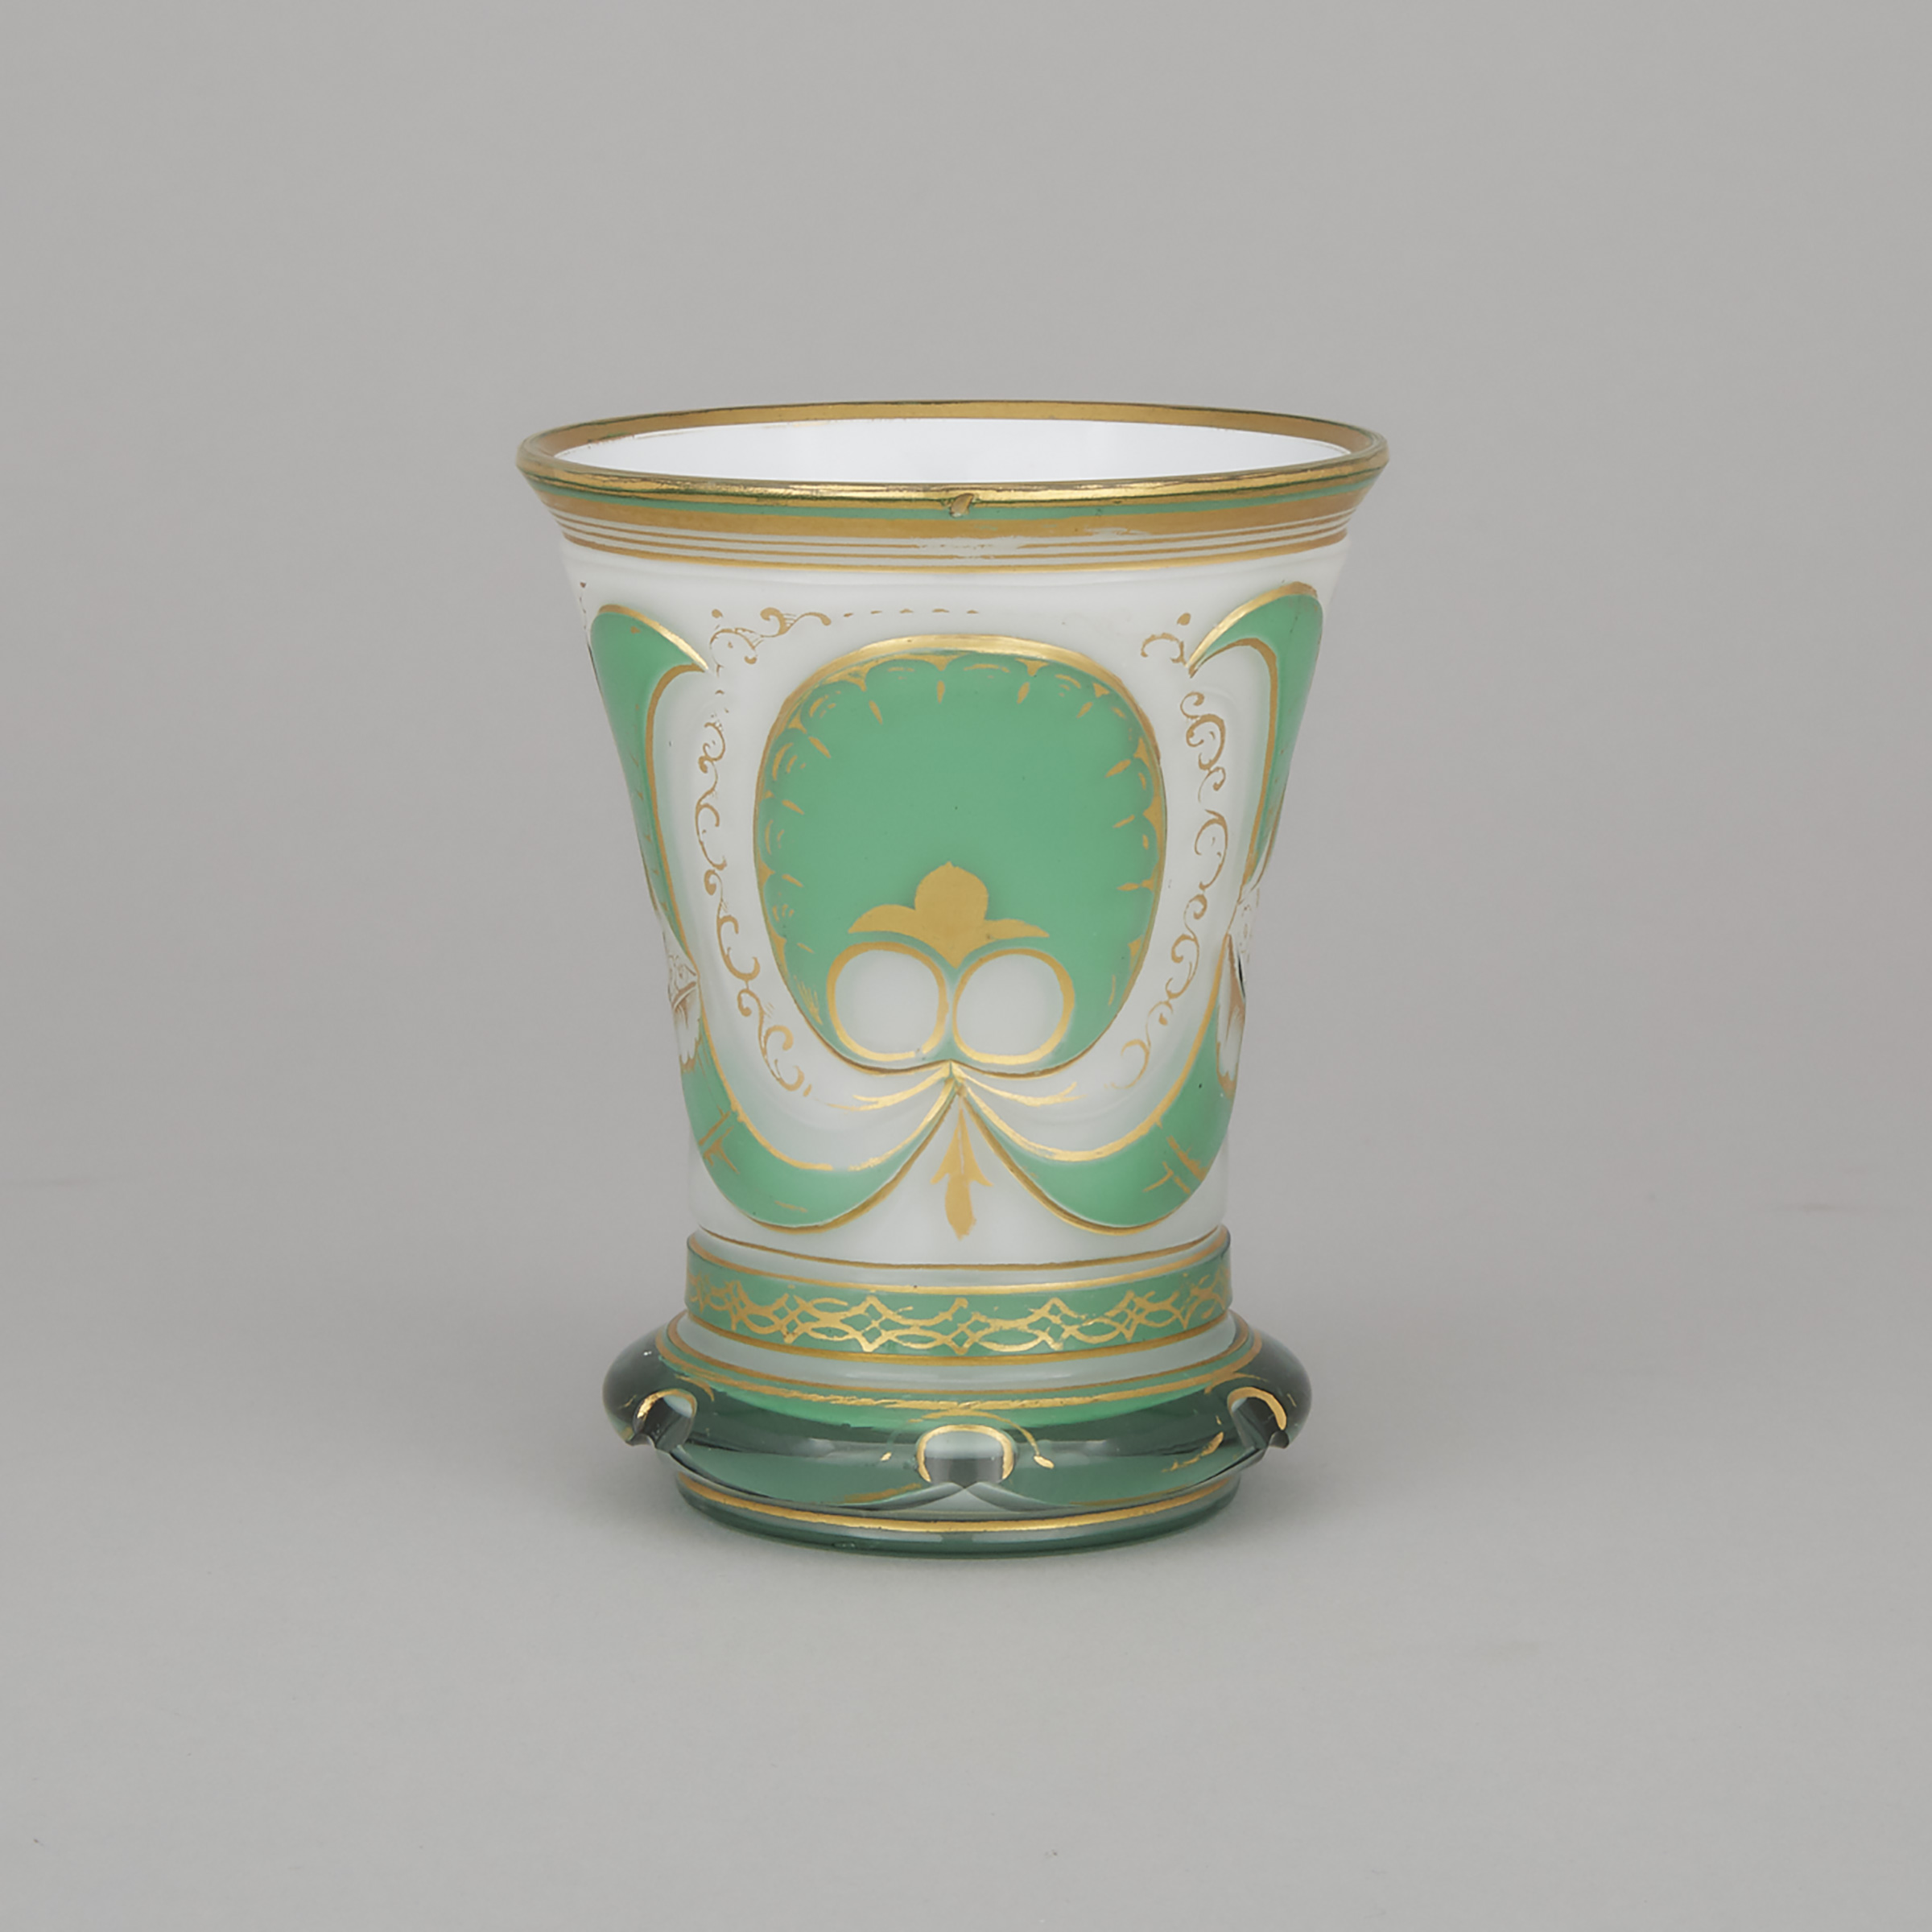 Bohemian Green Overlaid, Cut and Gilt Opaque White Cased Glass Beaker, mid-19th century